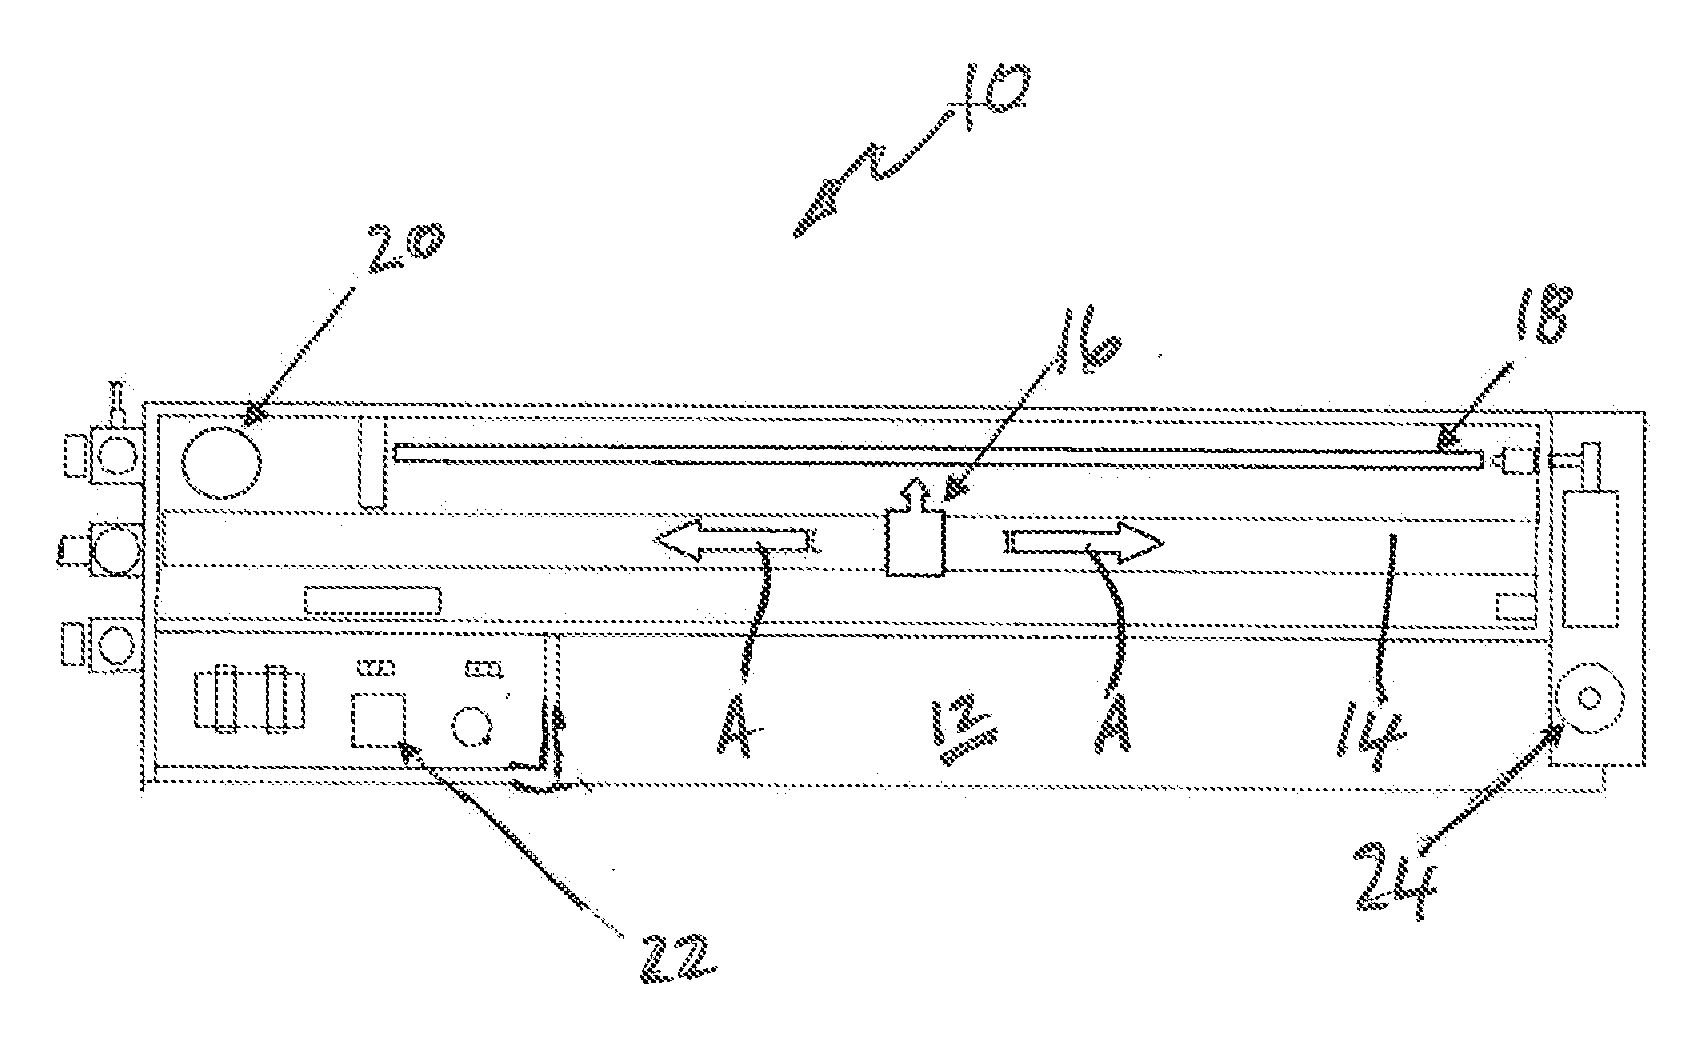 Method of Selectively Applying an Antimicrobial Coating to a Medical Device or Device Material